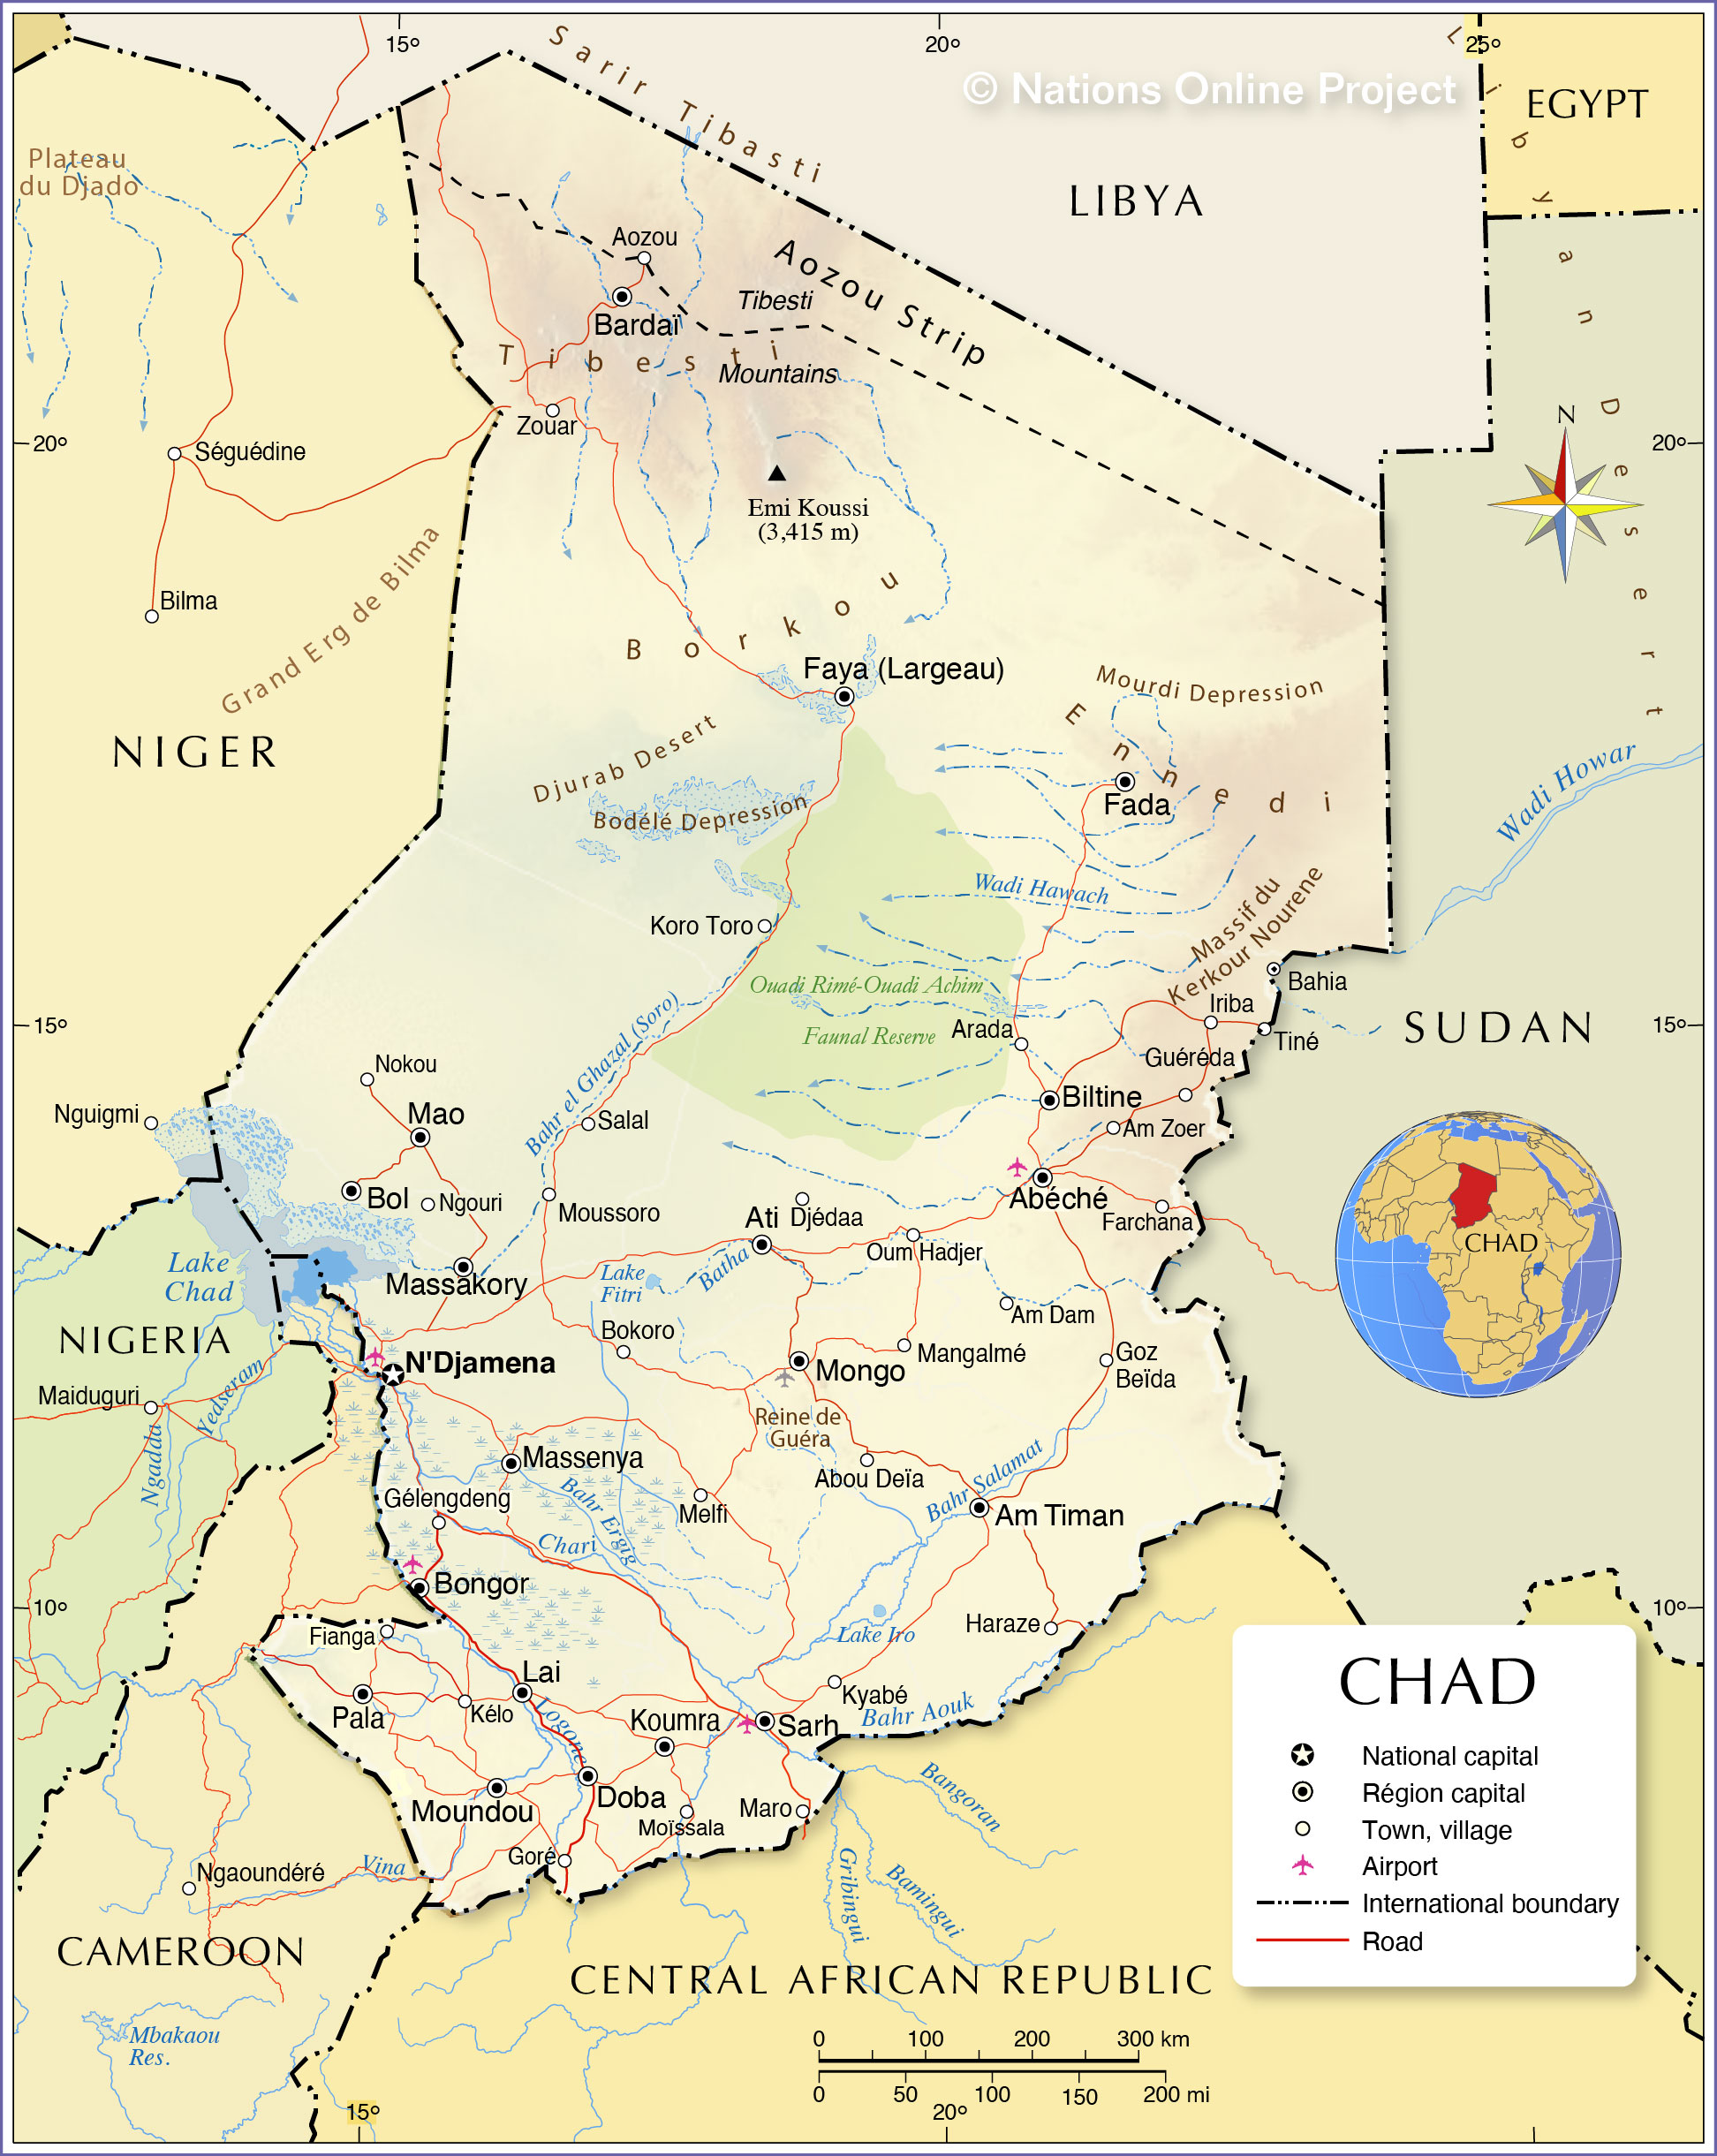 Goz Beïda Chad: A History of Amazing Facts and Things To Do